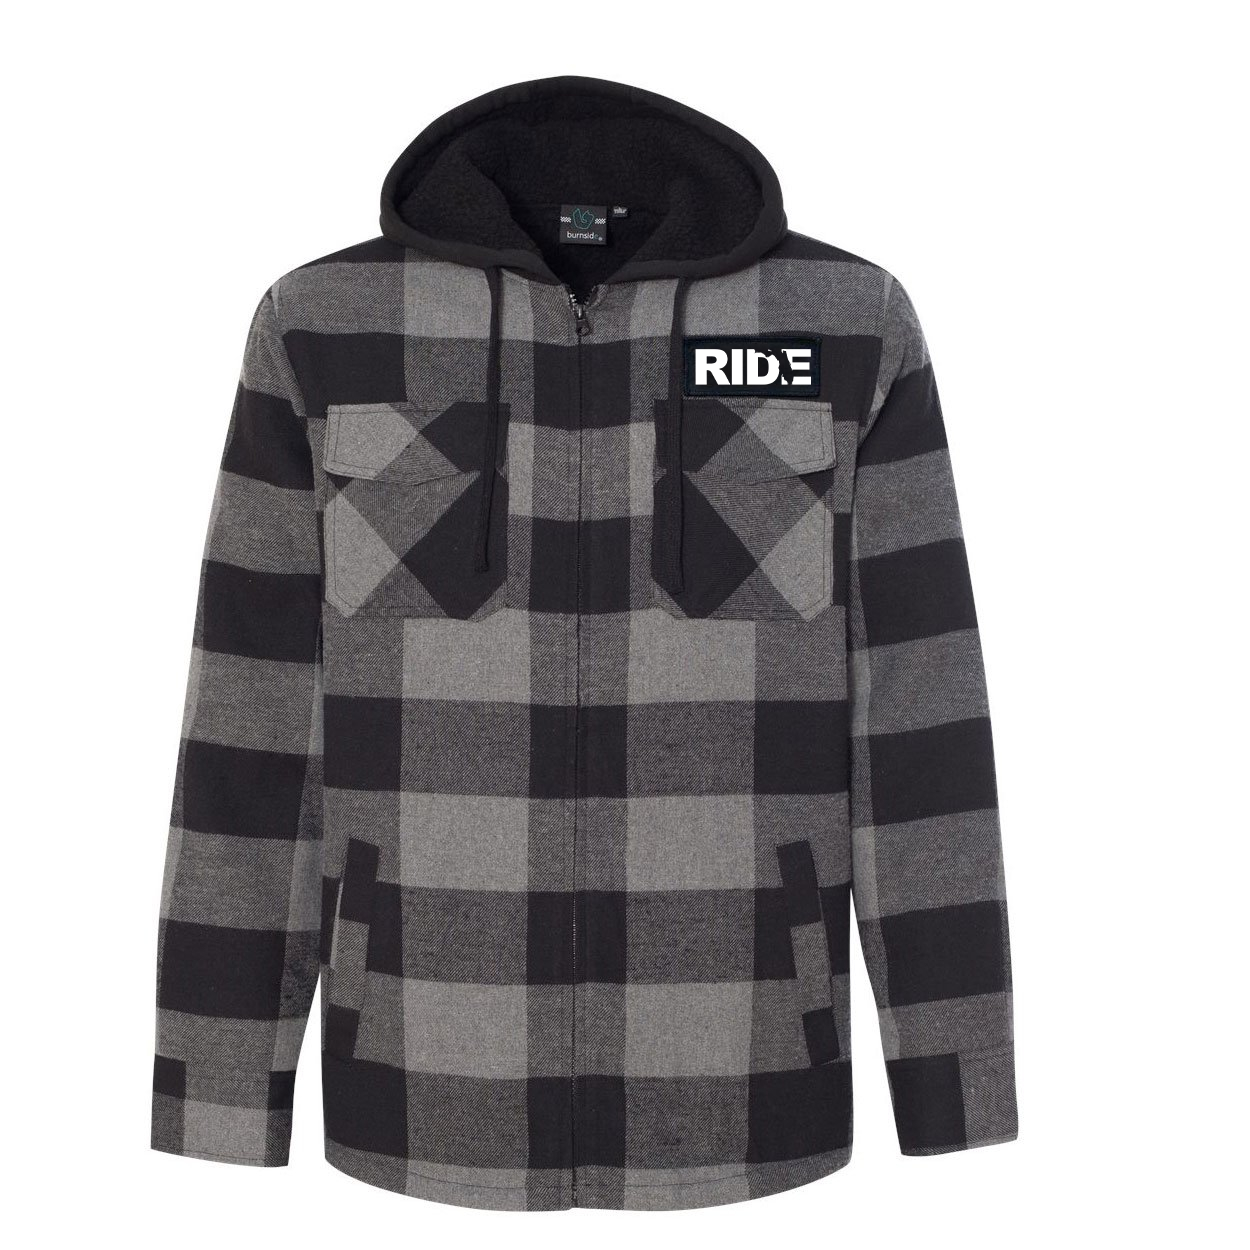 Ride Florida Classic Unisex Full Zip Woven Patch Hooded Flannel Jacket Black/Gray (White Logo)